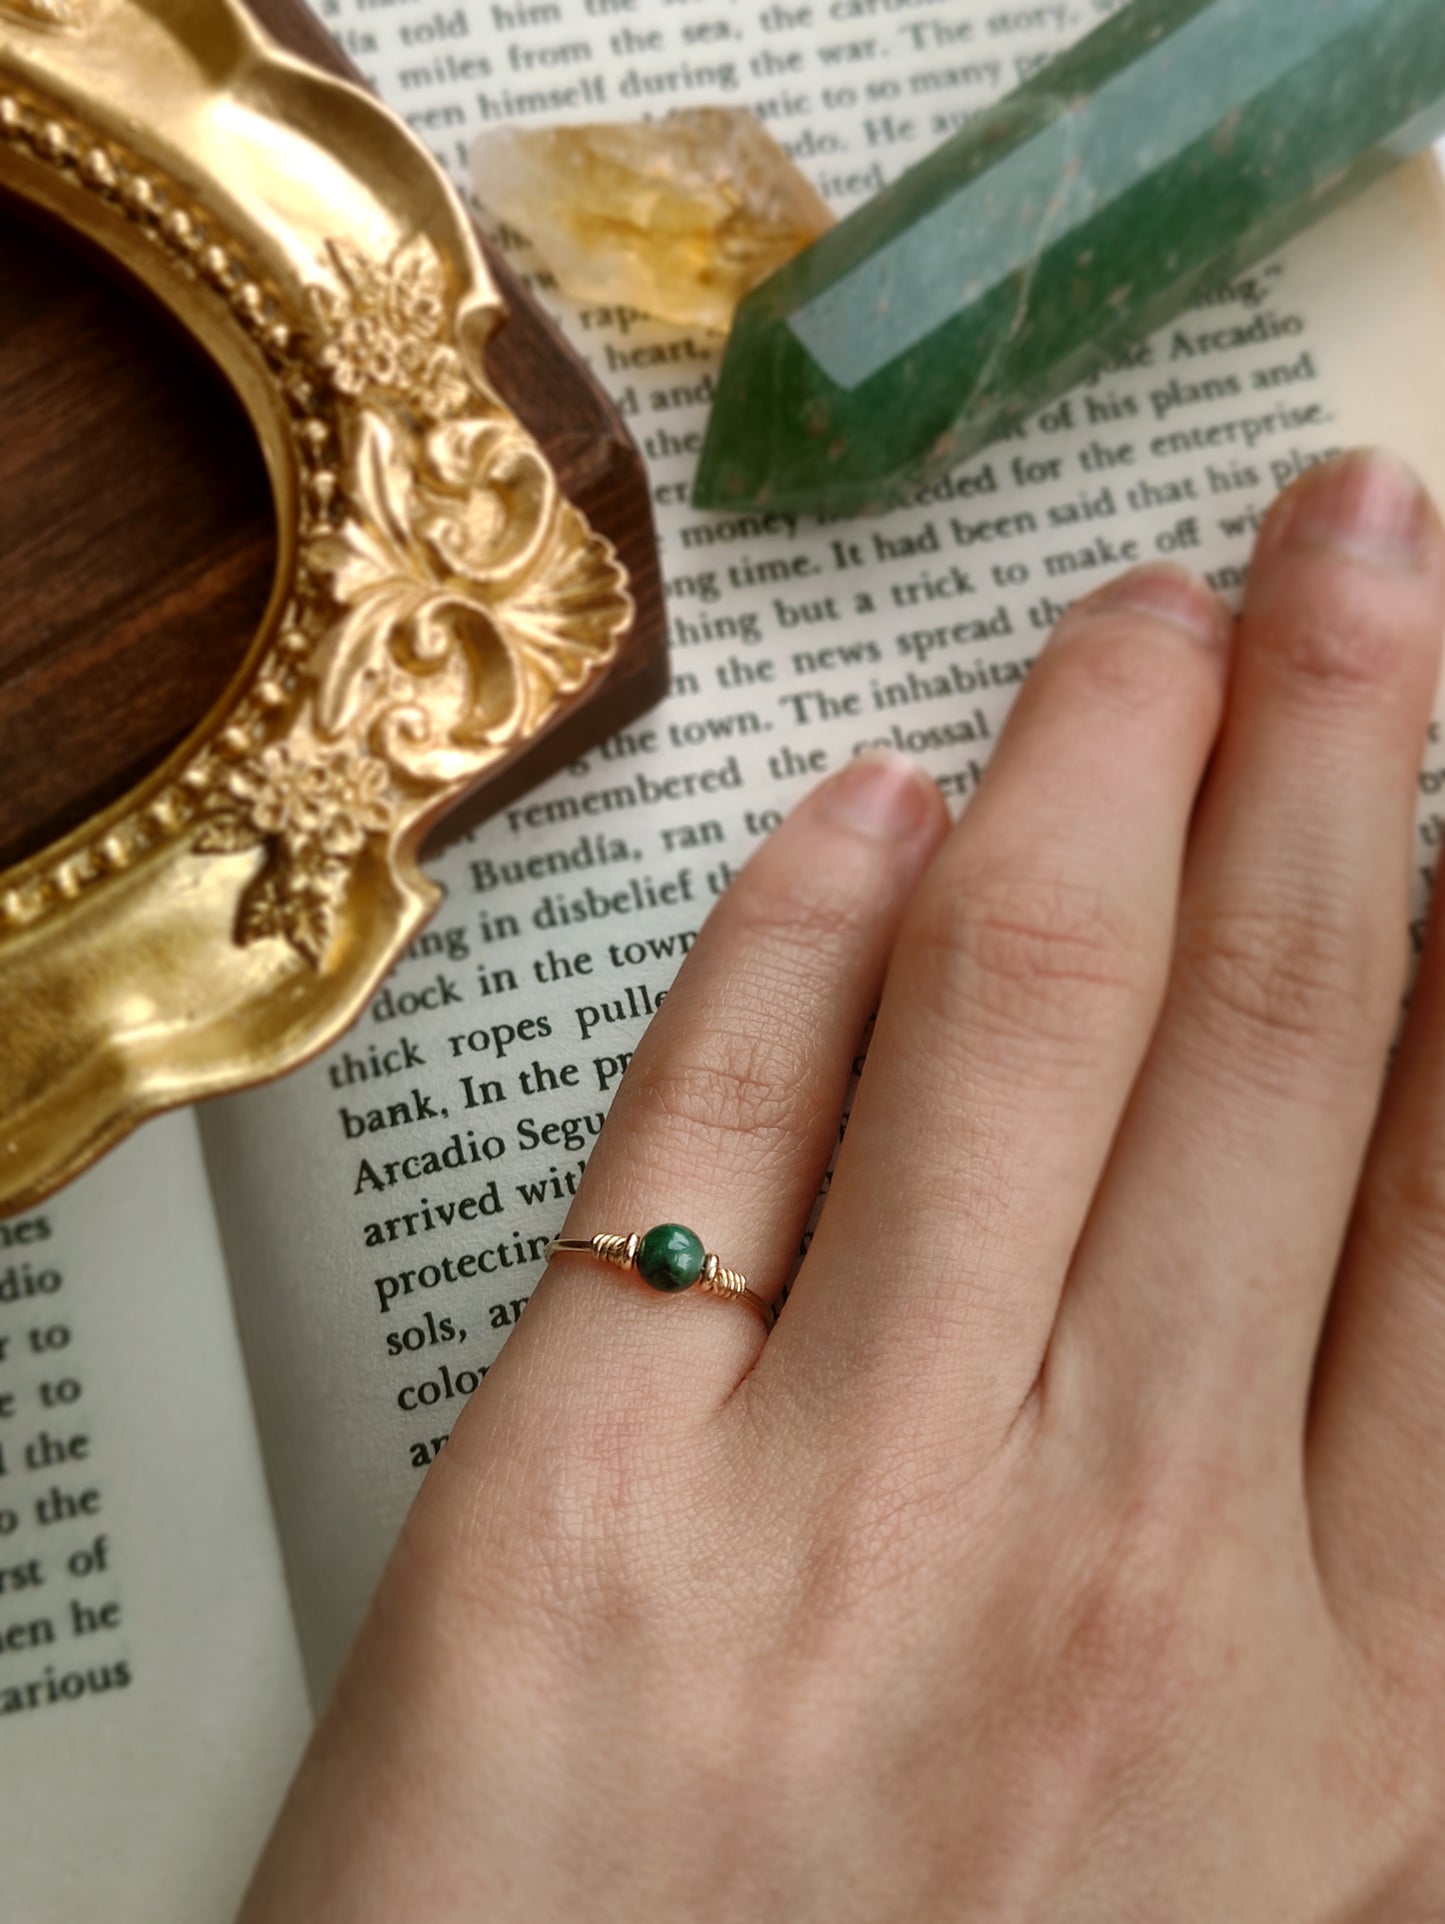 Tiny Emerald Ring in 14K Gold Filled